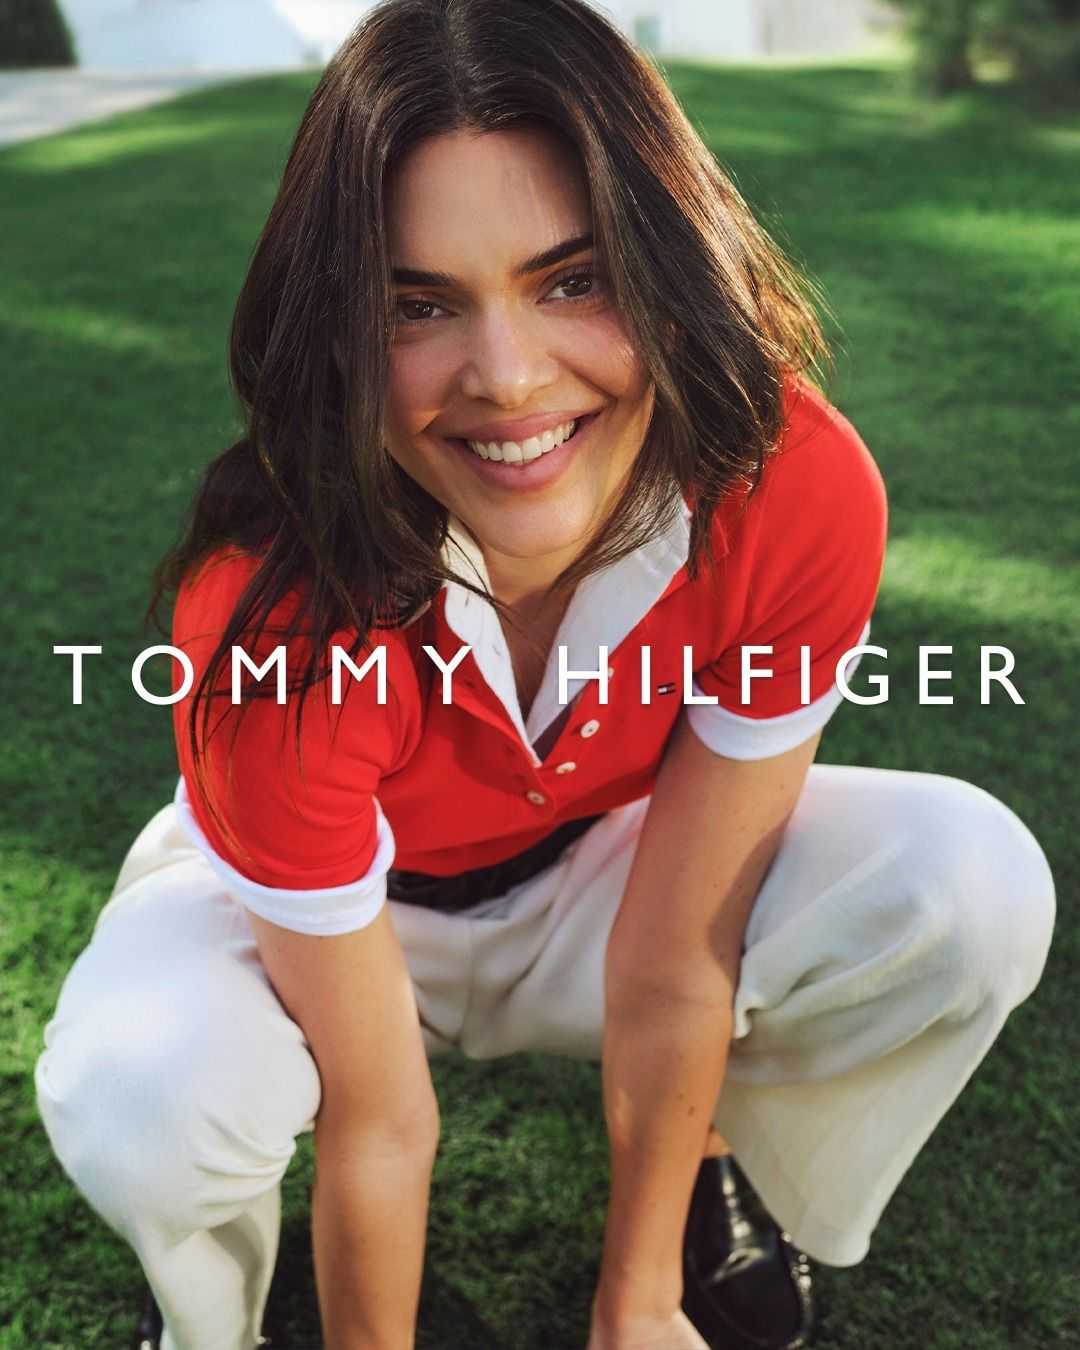 Tommy Hilfiger - RENELL MEDRANO - 6528